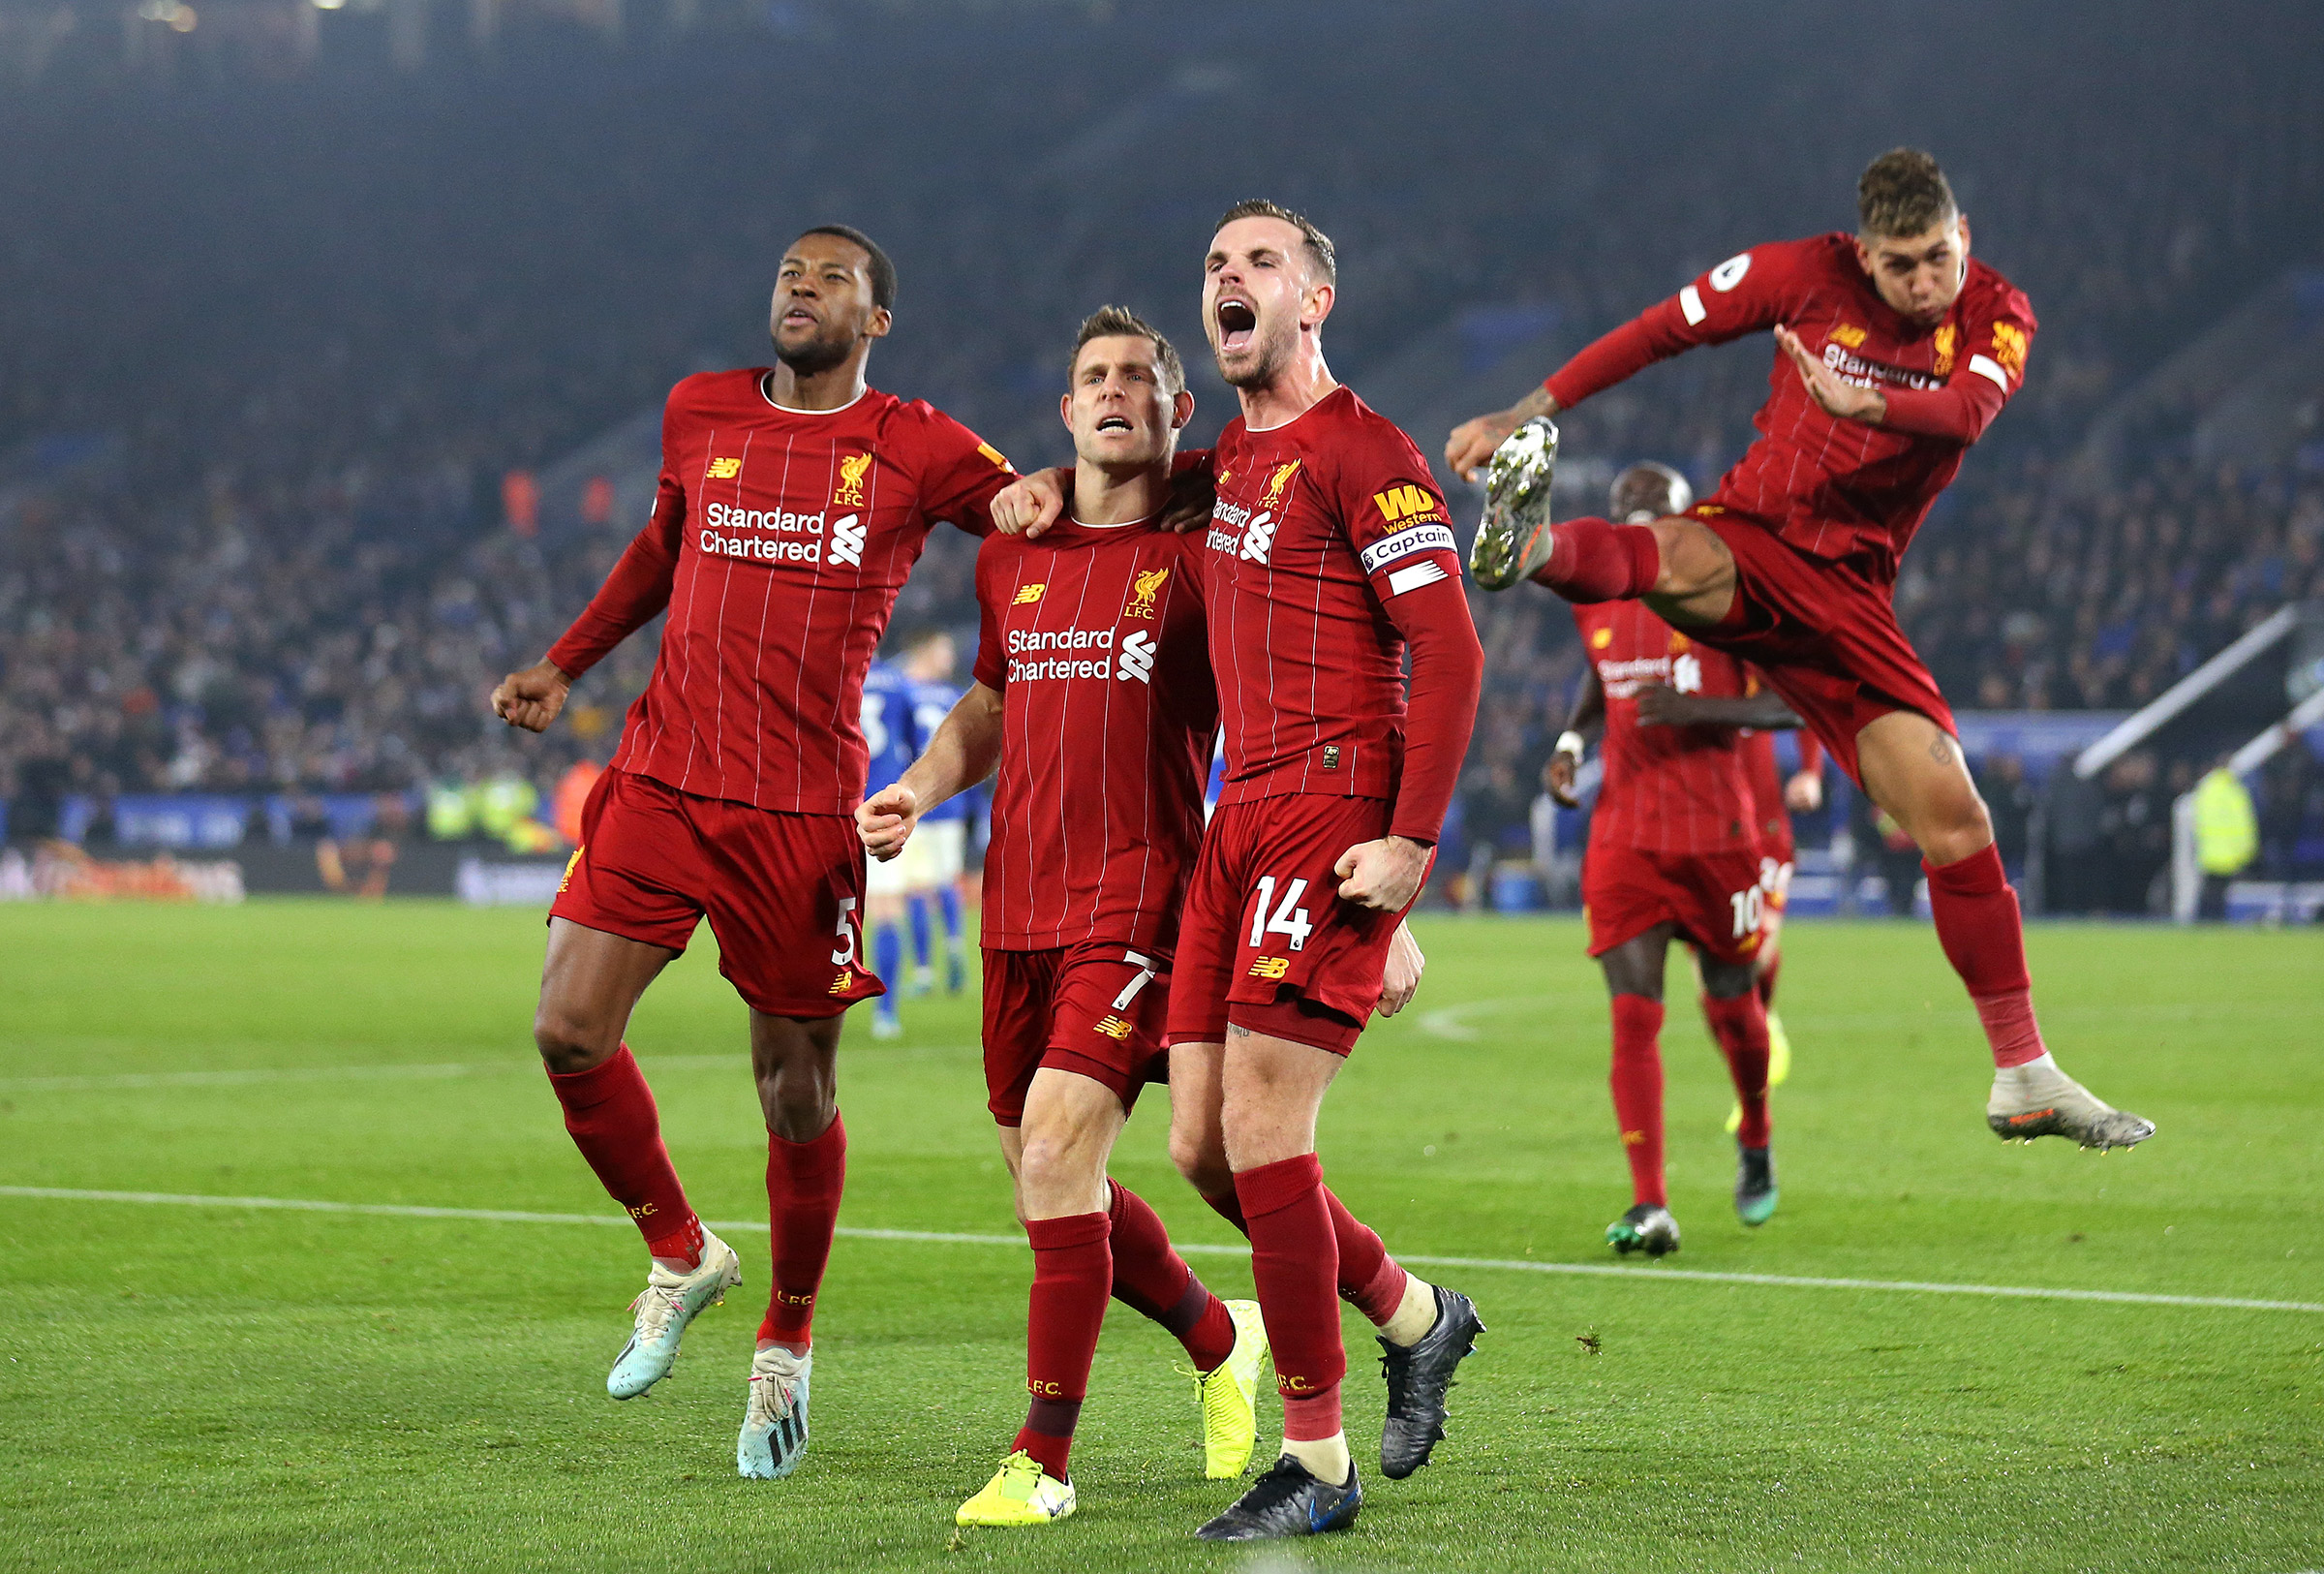 James Milner of Liverpool celebrates with Jordan Henderson and Georginio Wijnaldum during the Premier League match between Leicester City and Liverpool FC at The King Power Stadium in Leicester, United Kingdom on Dec. 26, 2019. (Getty Images)